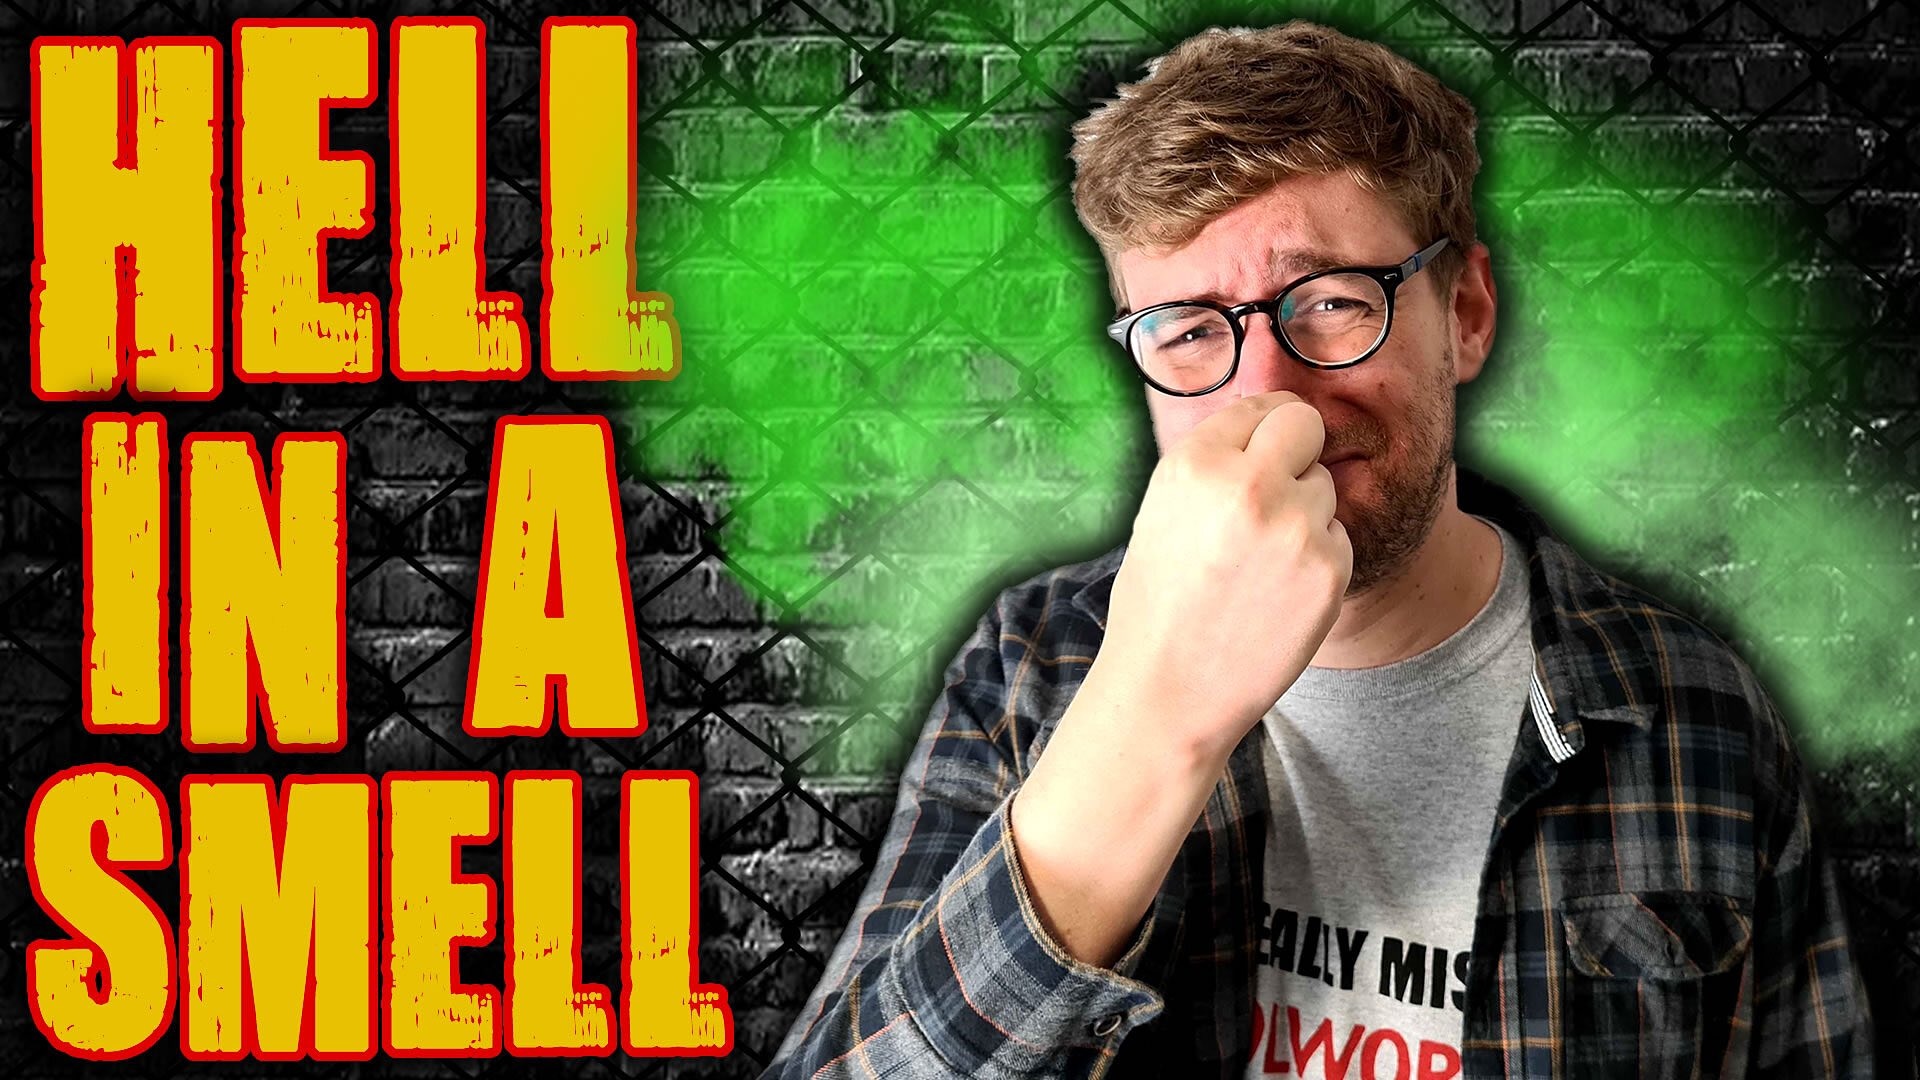 Cultaholic Wrestling on X: HELL IN A SMELL 4 resuming shortly at